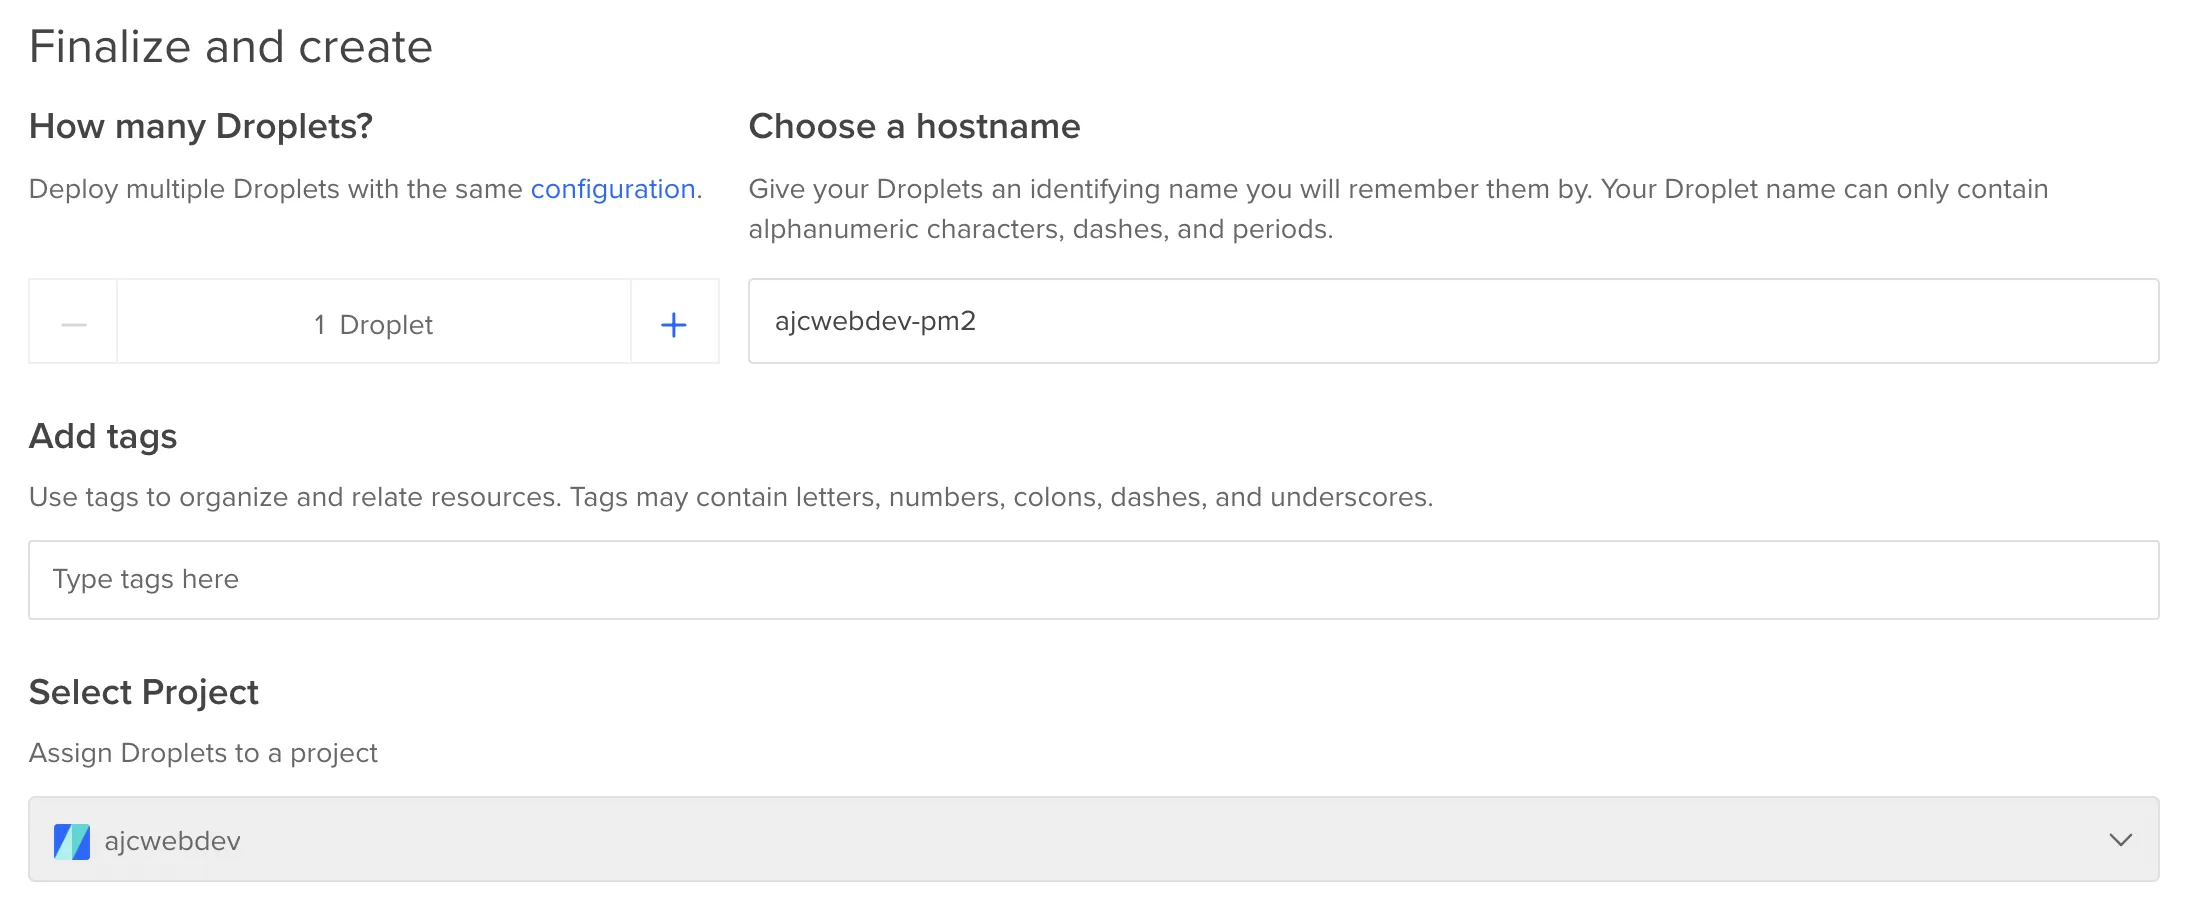 10 - finalize-and-create-choose-hostname